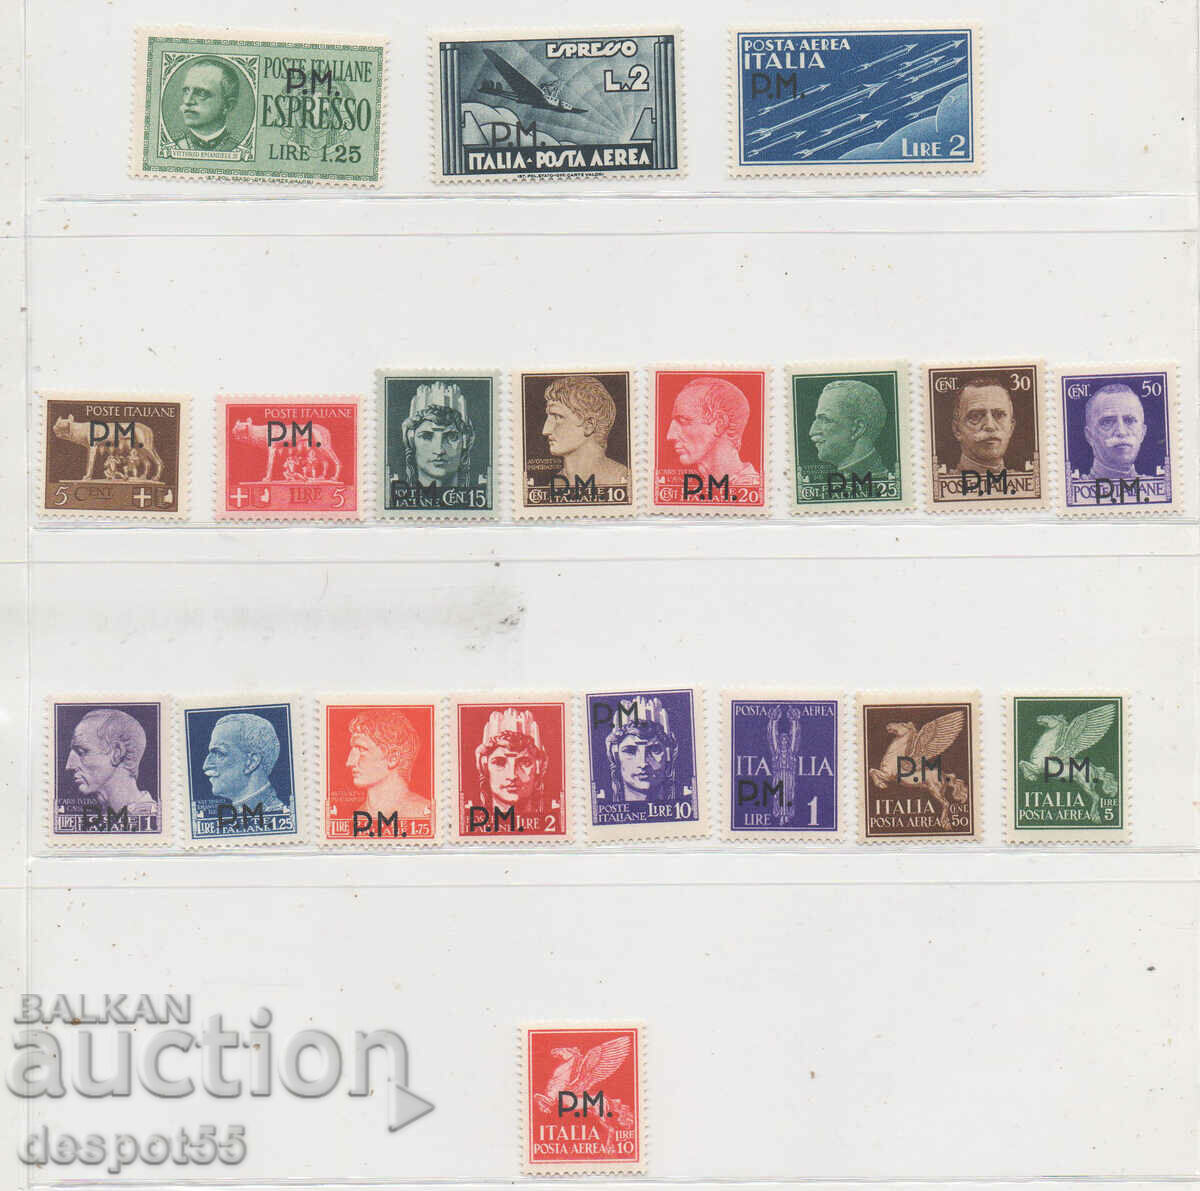 1944. Italy. Imperiale series overprinted P.M.